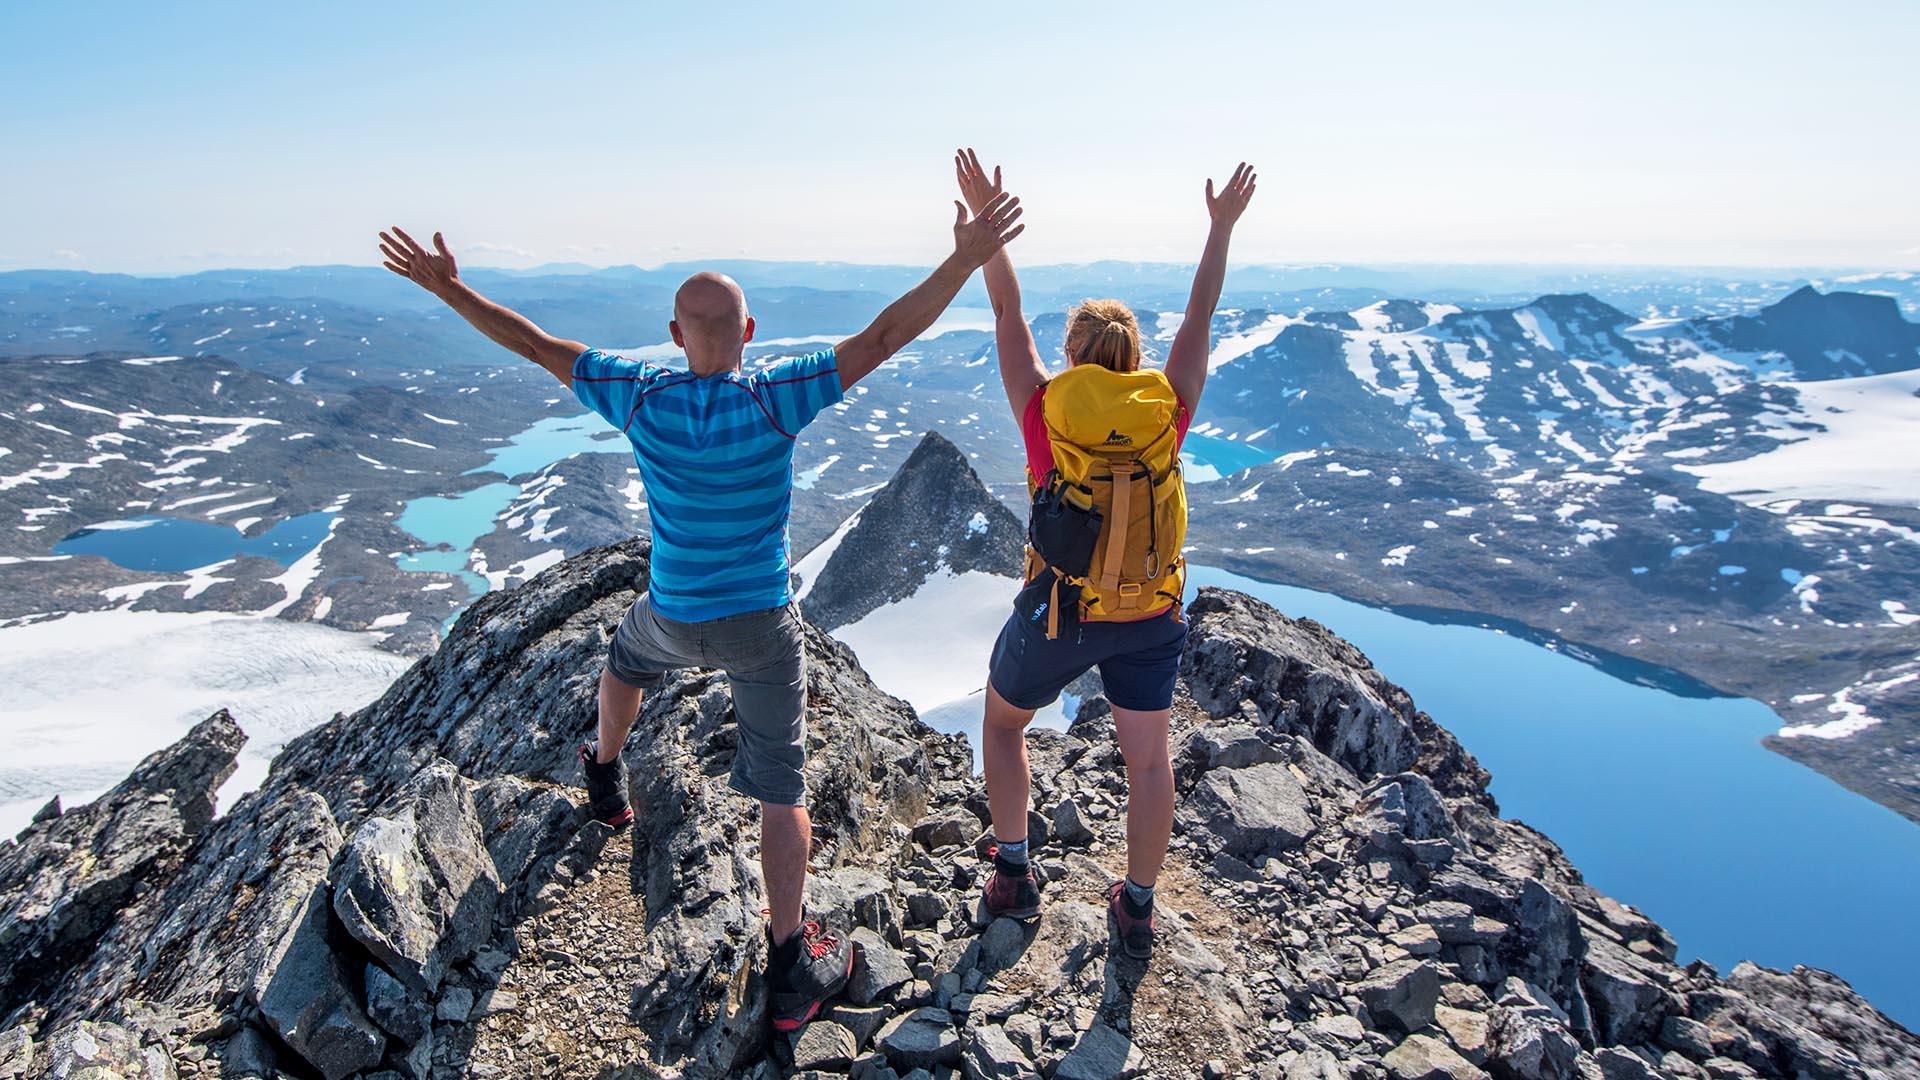 Two mountain hikers in summer clothes on the summit of a high mountain as the look out over a barren high mountain landscape with glaciers, lakes and other high mountains, celebrating their achievement with a joyous posture.